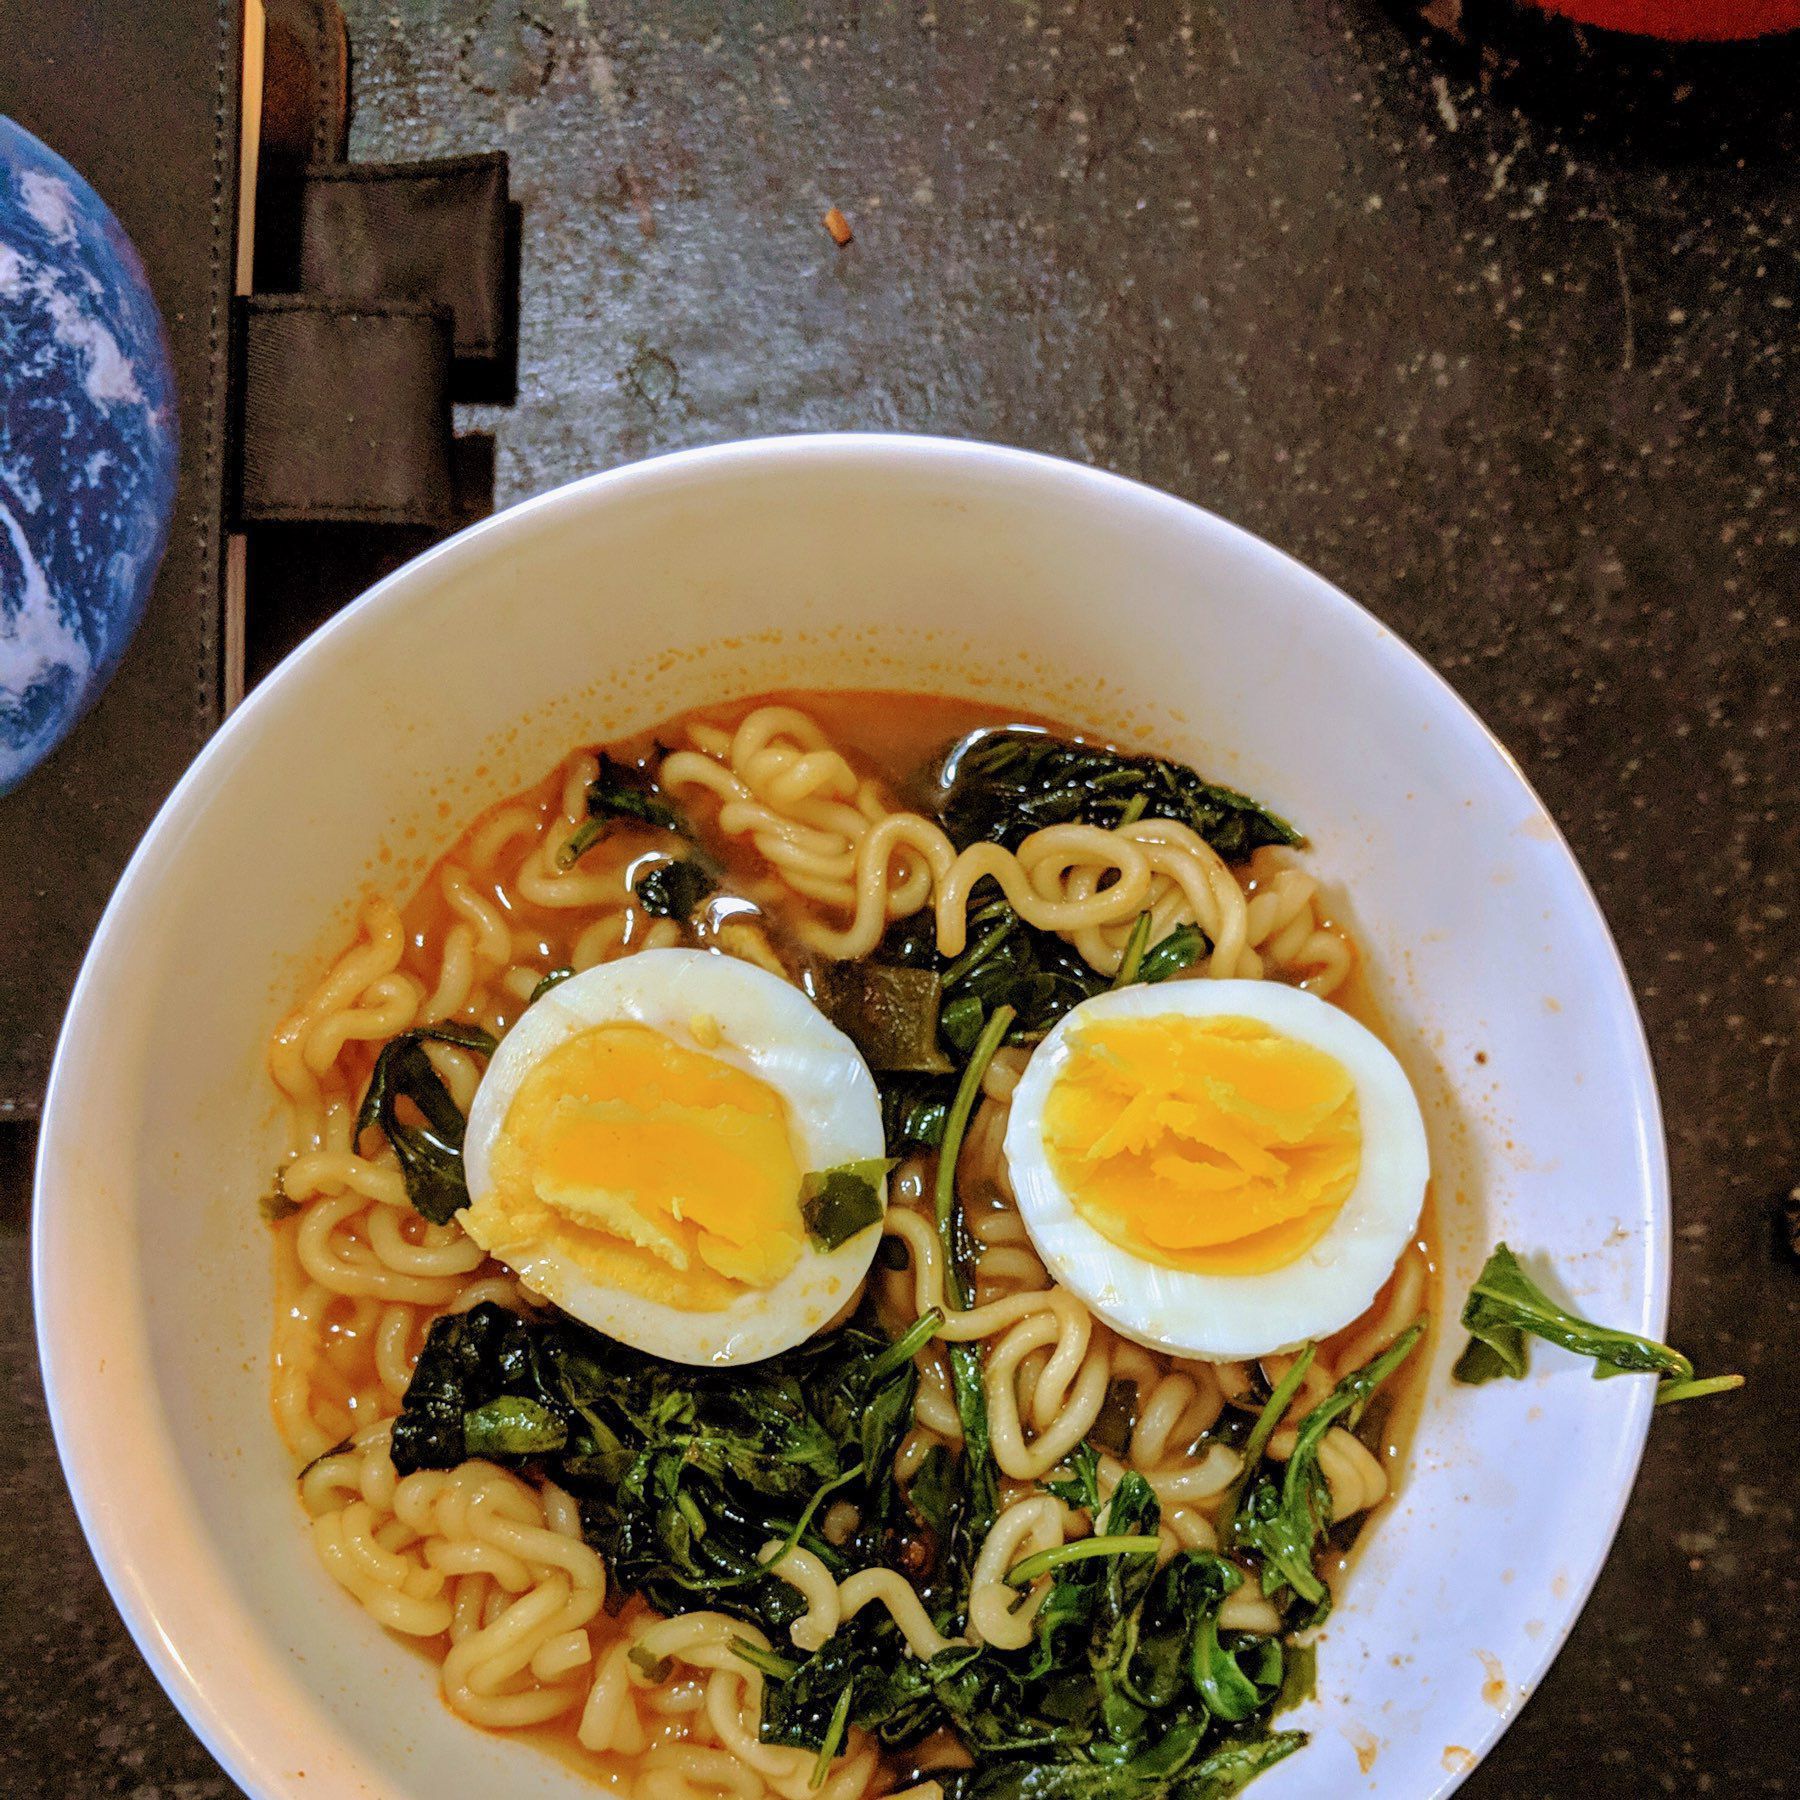 Ramen noodles in spicy broth with arugula and face up hardboiled egg